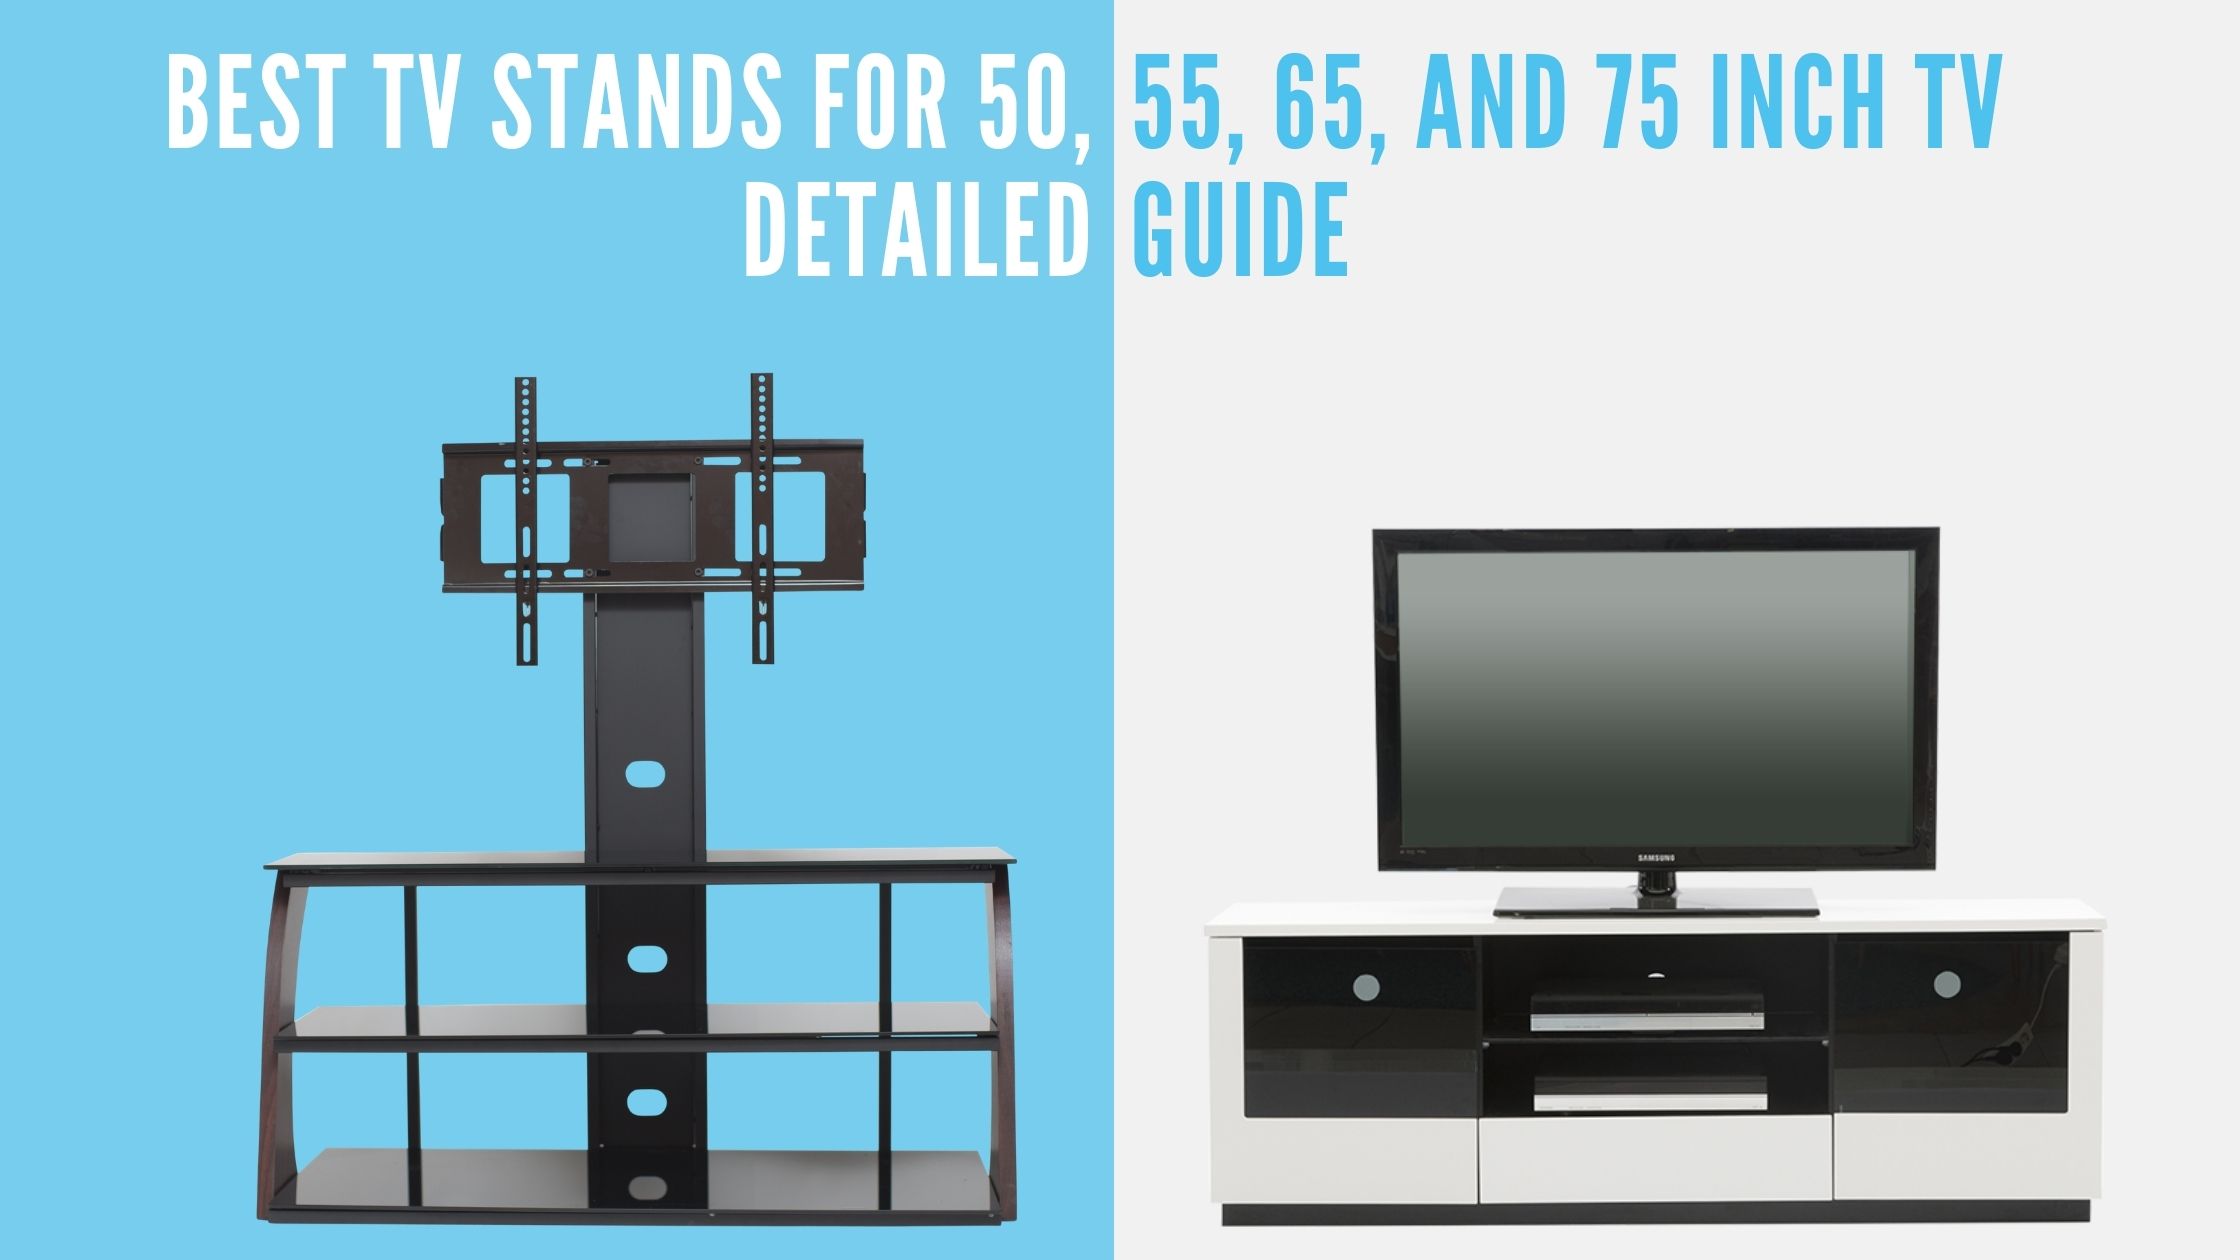 You are currently viewing 8 Best TV Stands for 50, 55, 65, and 75 inch TV